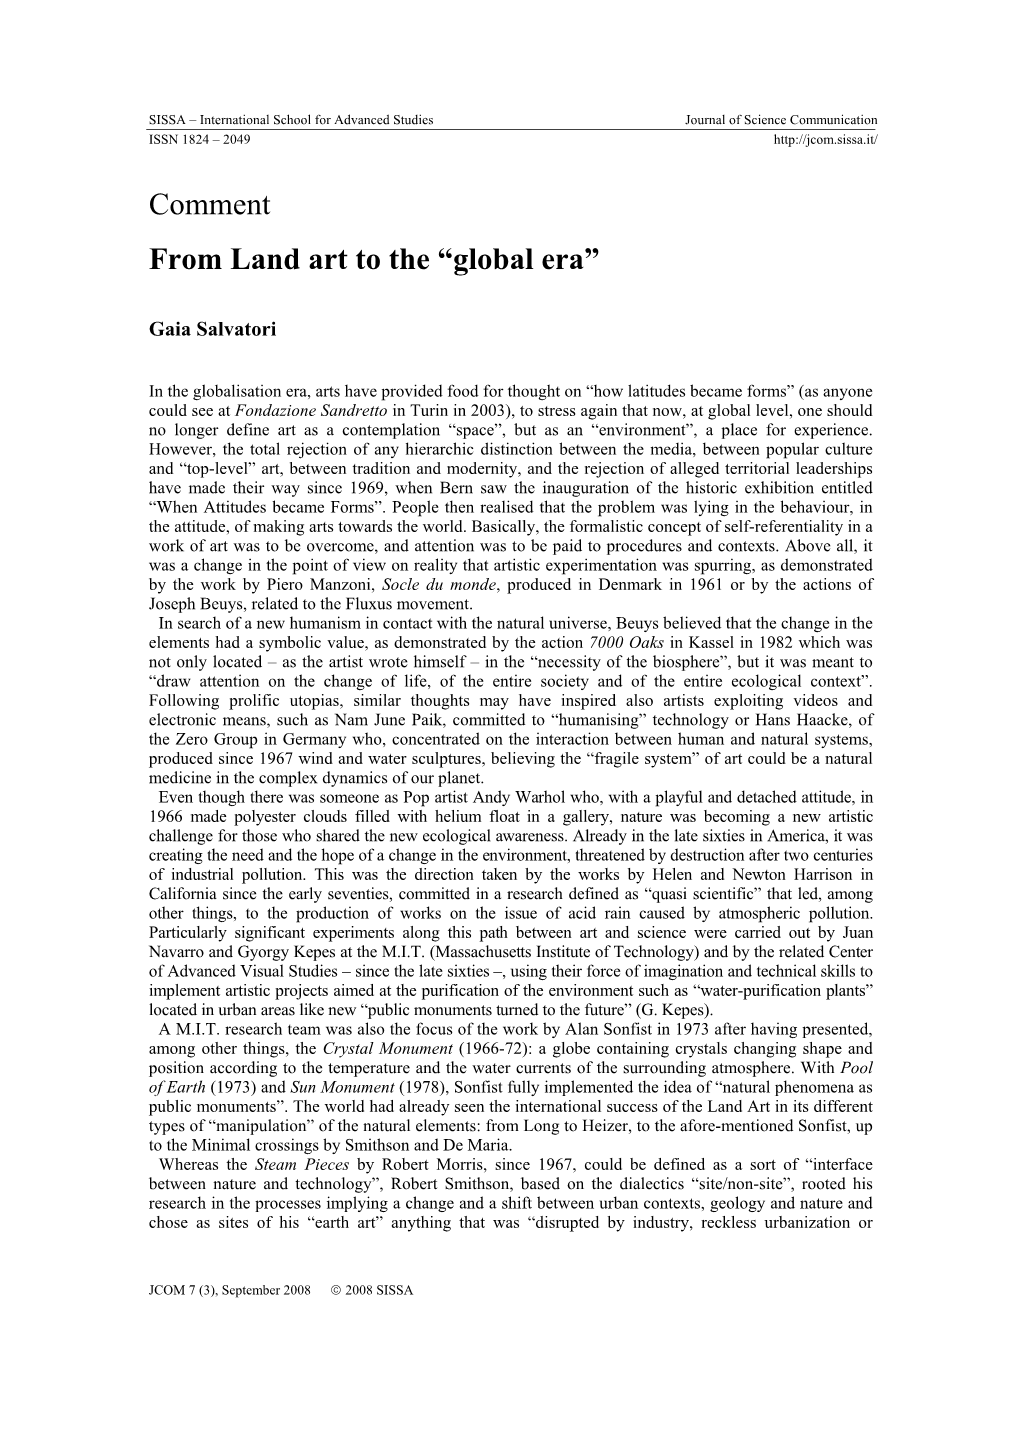 Comment from Land Art to the “Global Era”